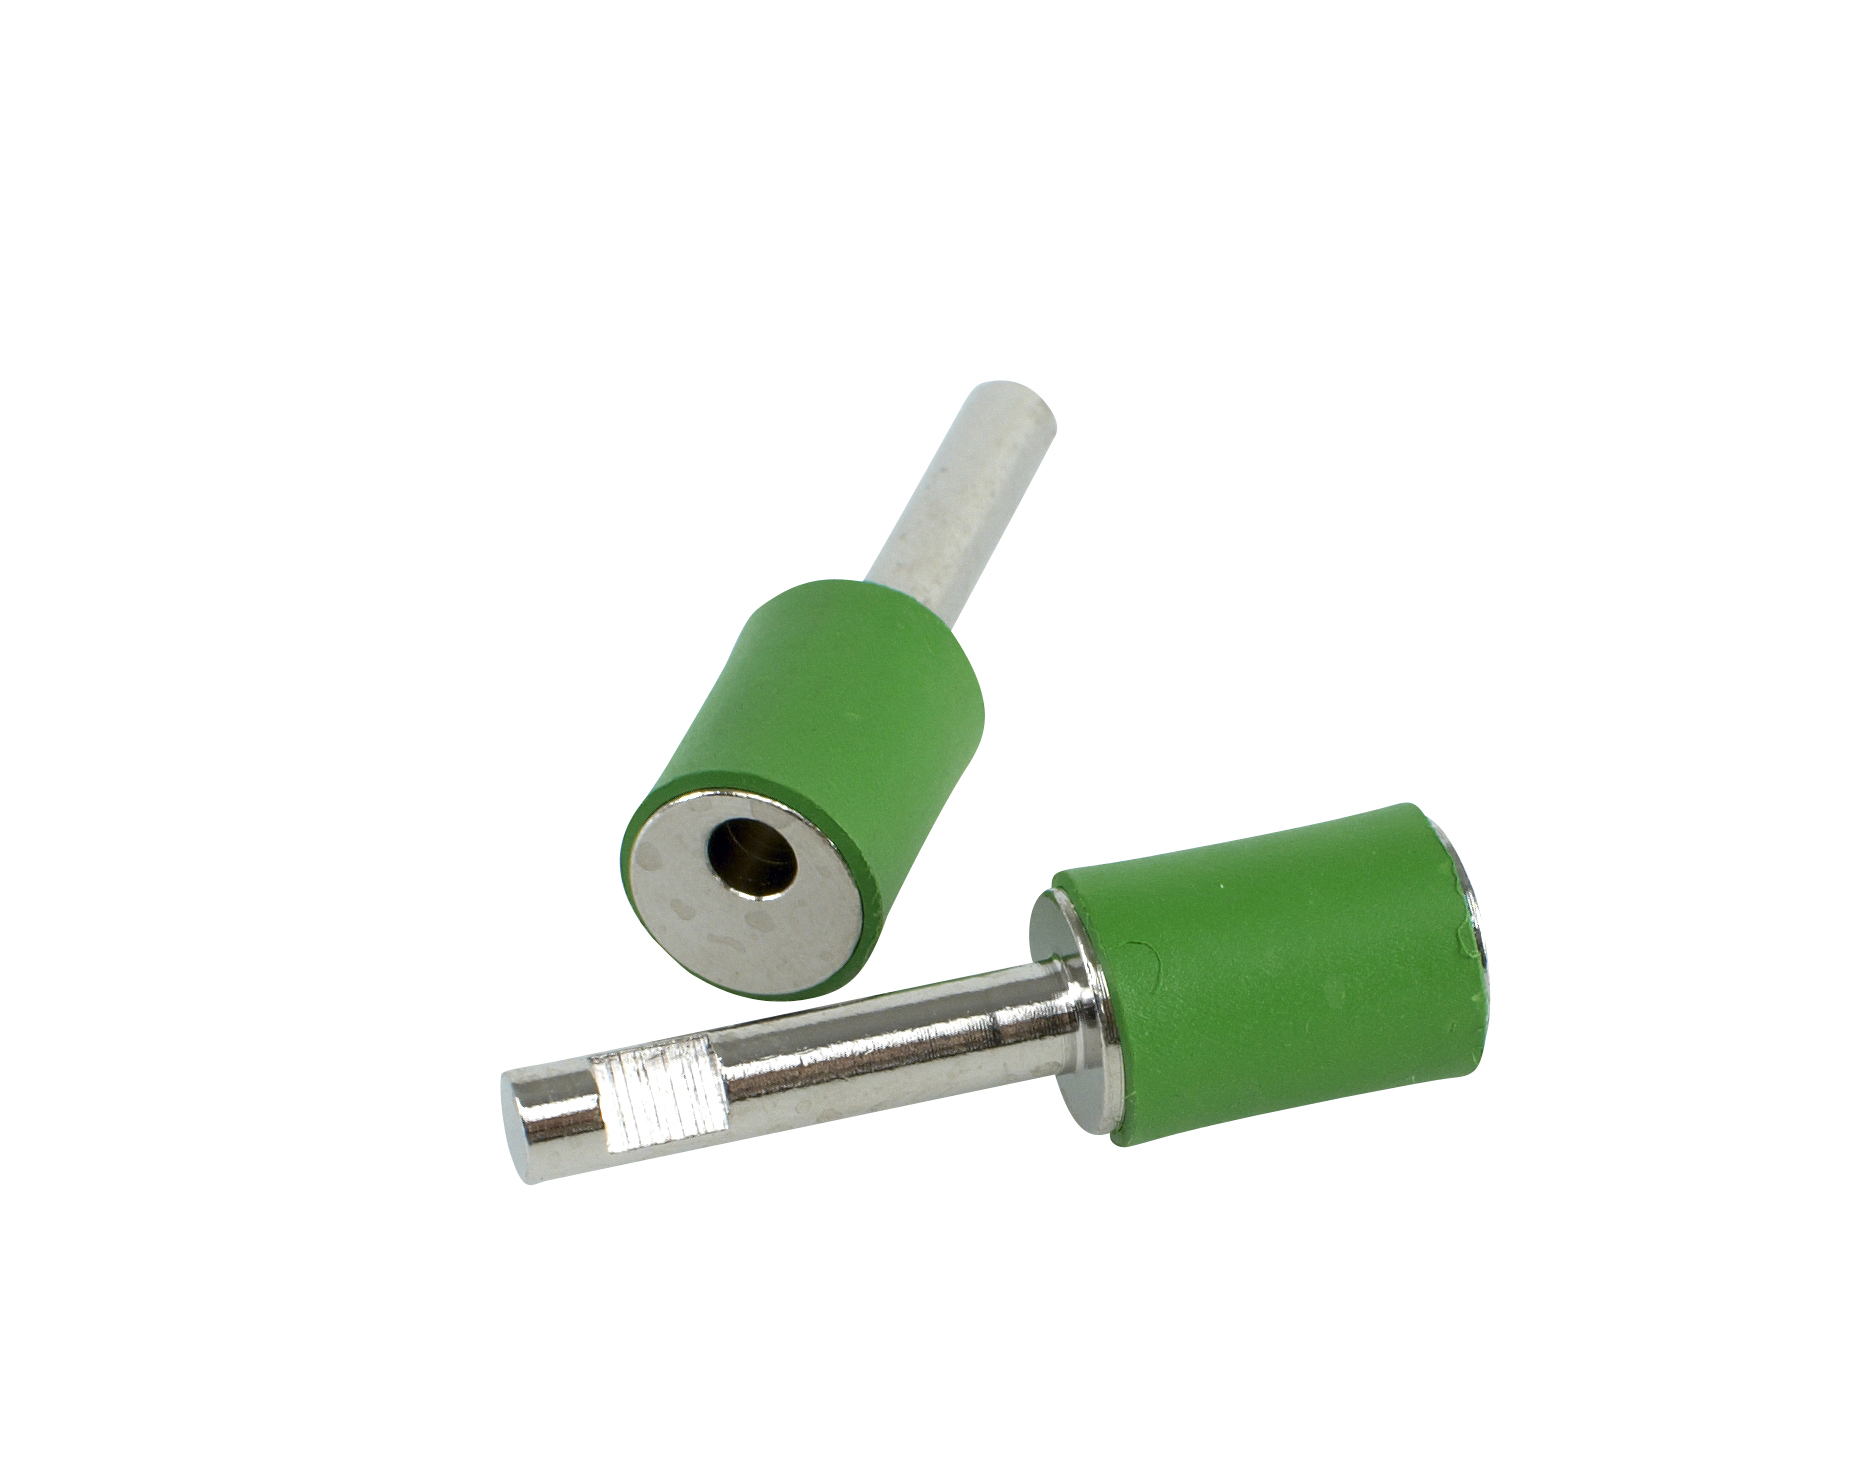 Adapter set for cautery burners